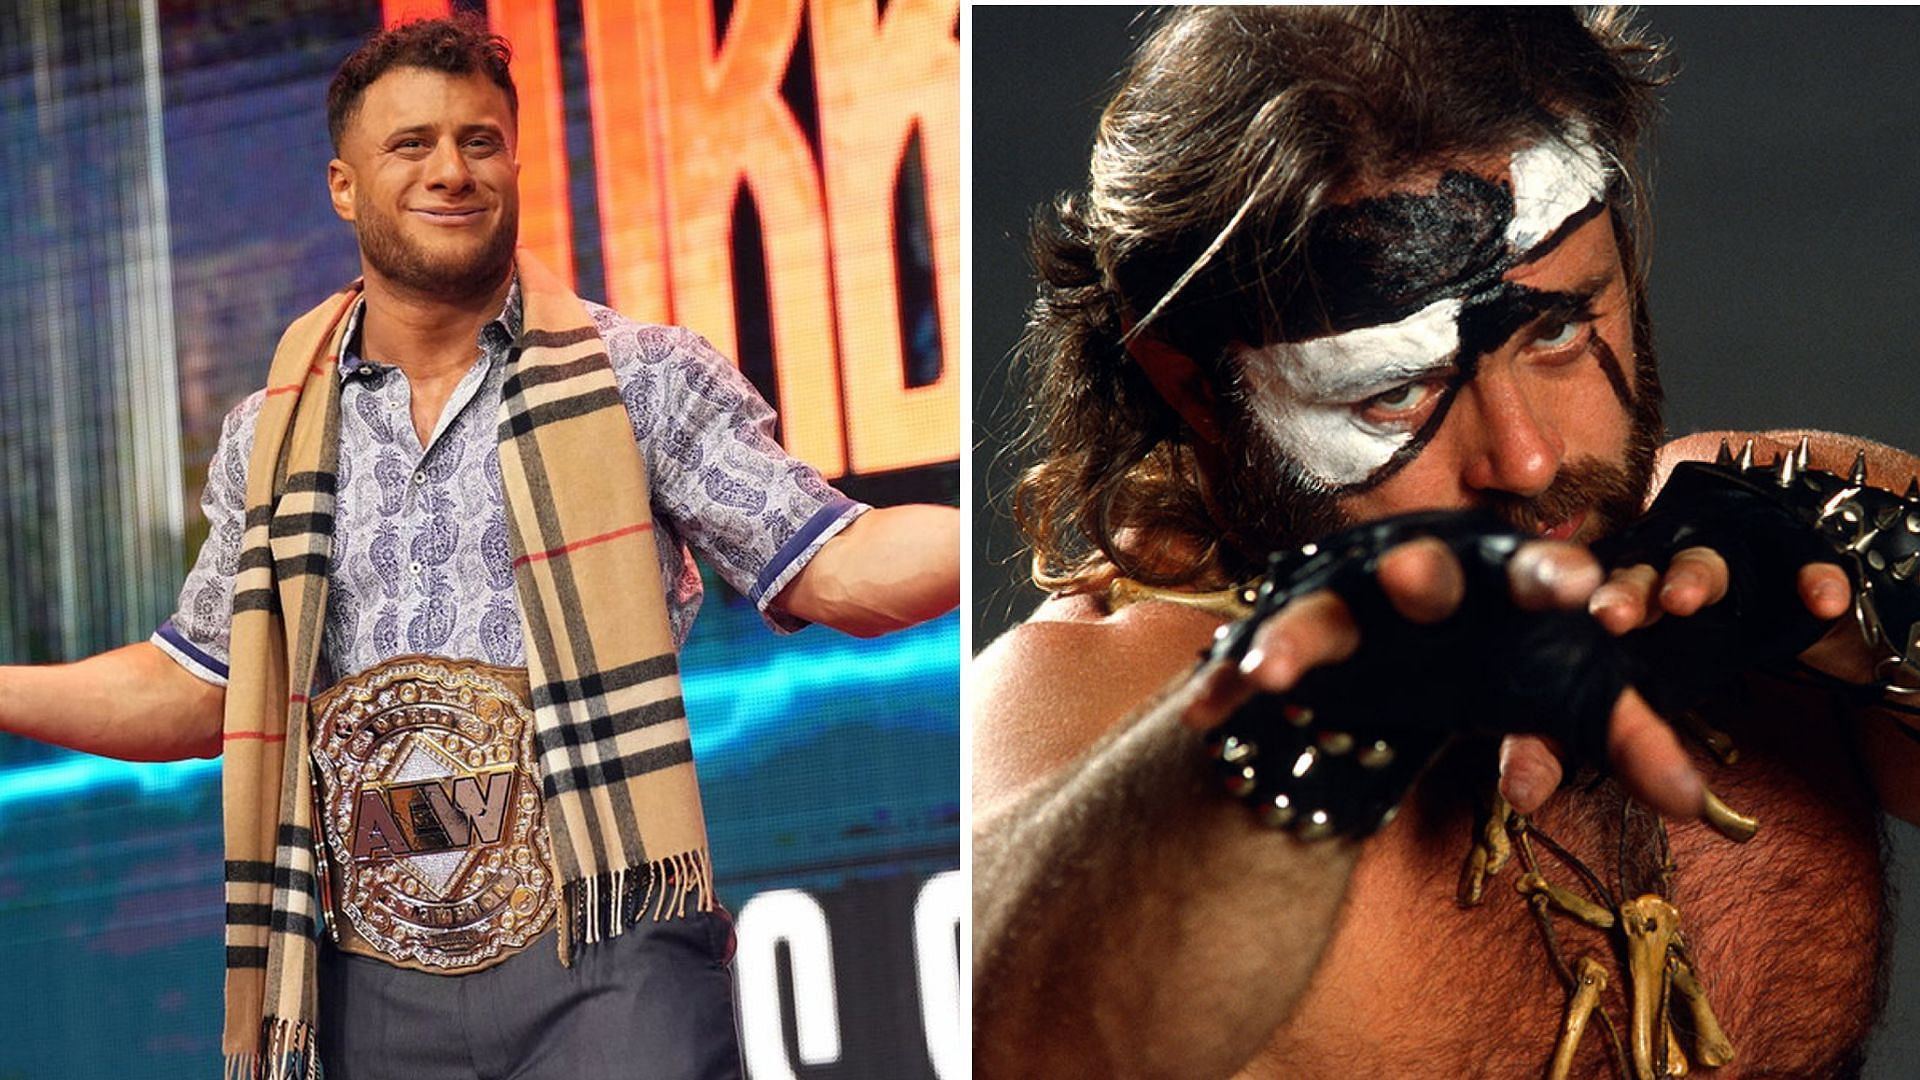 Has Kevin Sullivan figured out why MJF turned babyface?